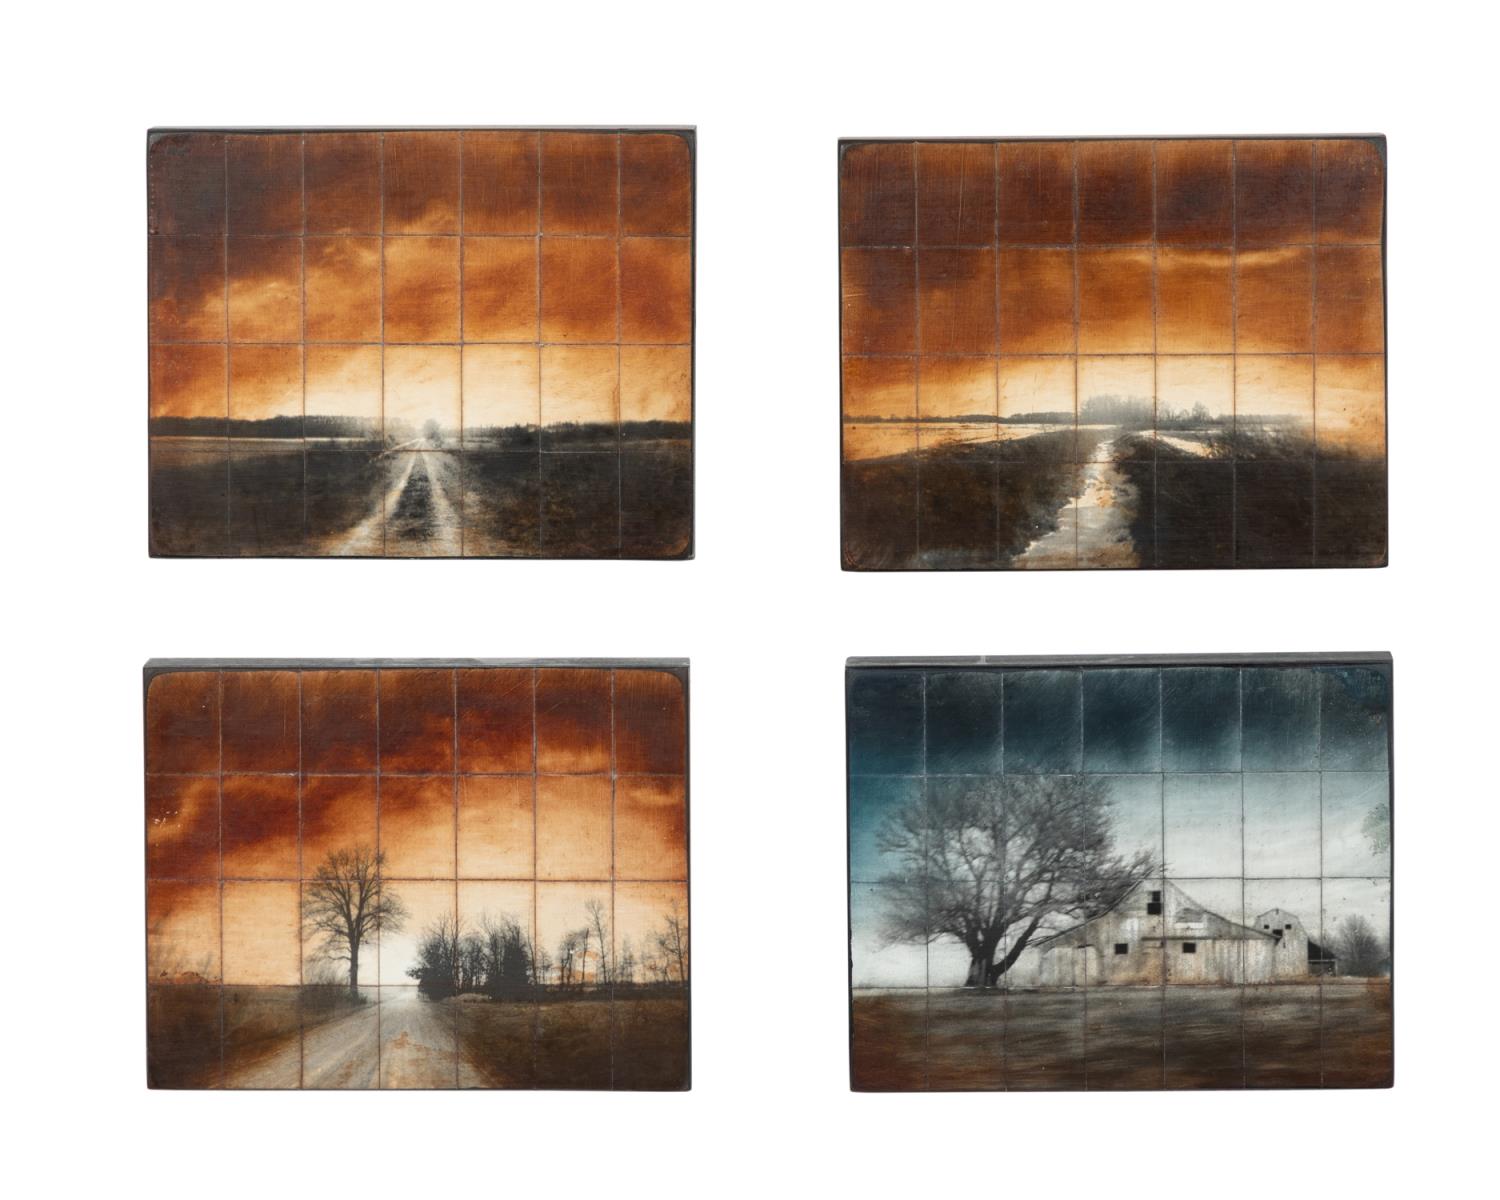 FOUR MIXED MEDIA LANDSCAPES BY 2c000c